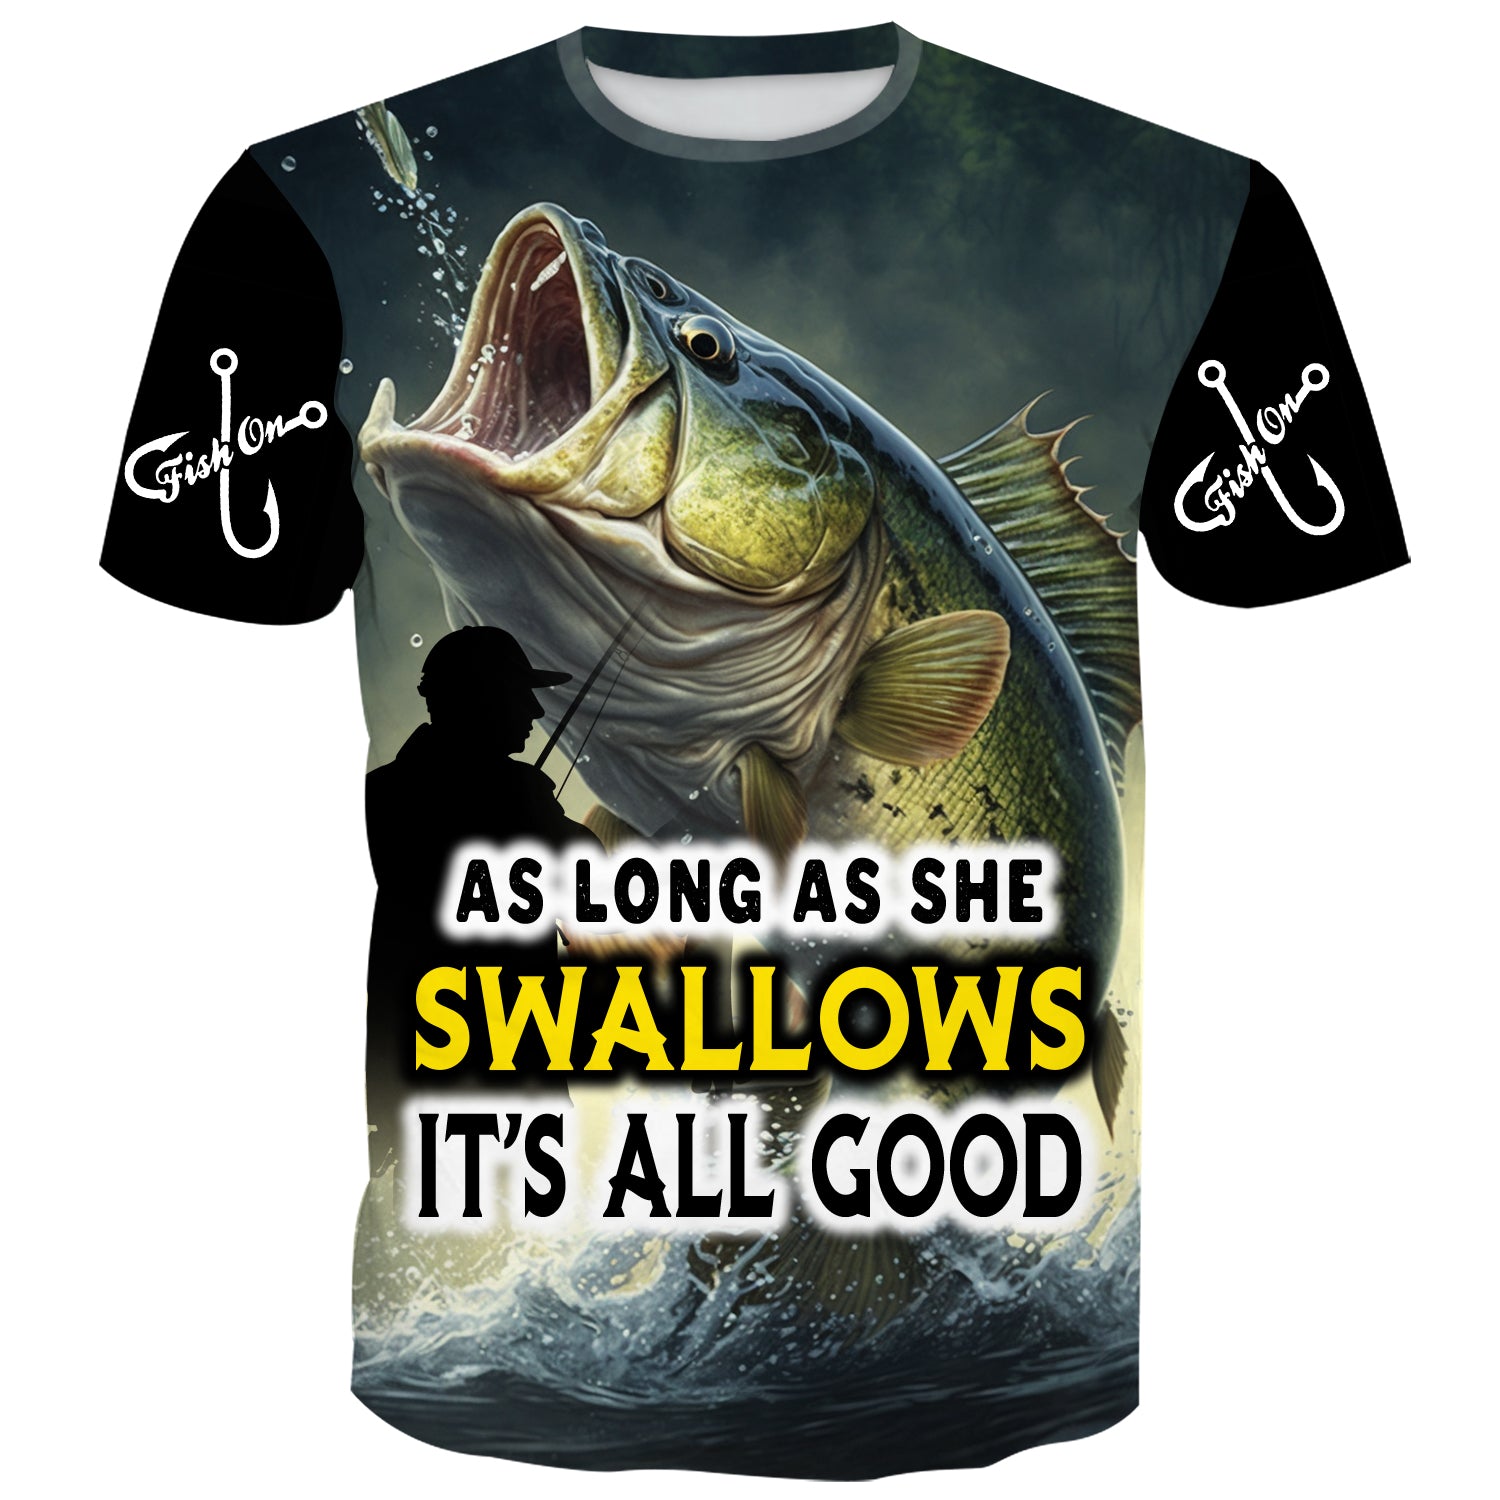 As long as she swallows, it's all good. Funny fishing tee with image of a fish with vibrant colors on all over print.